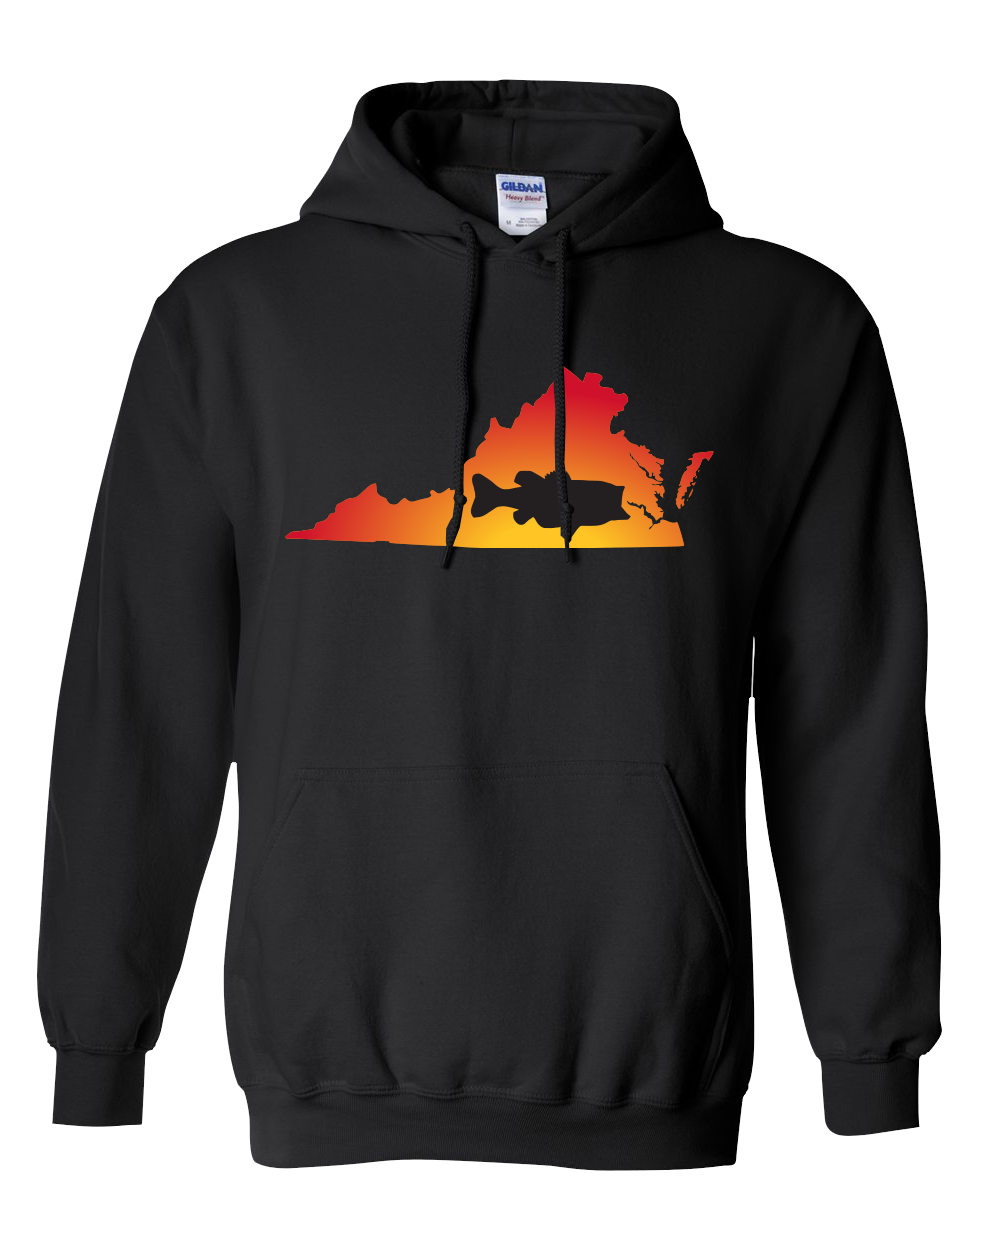 Pullover Hooded Sweatshirt Virginia Black Large Mouth Bass Vibrant Design High Quality Tight Knit Ring Spun Low Maintenance Cotton Printed With The Newest Available Color Transfer Technology